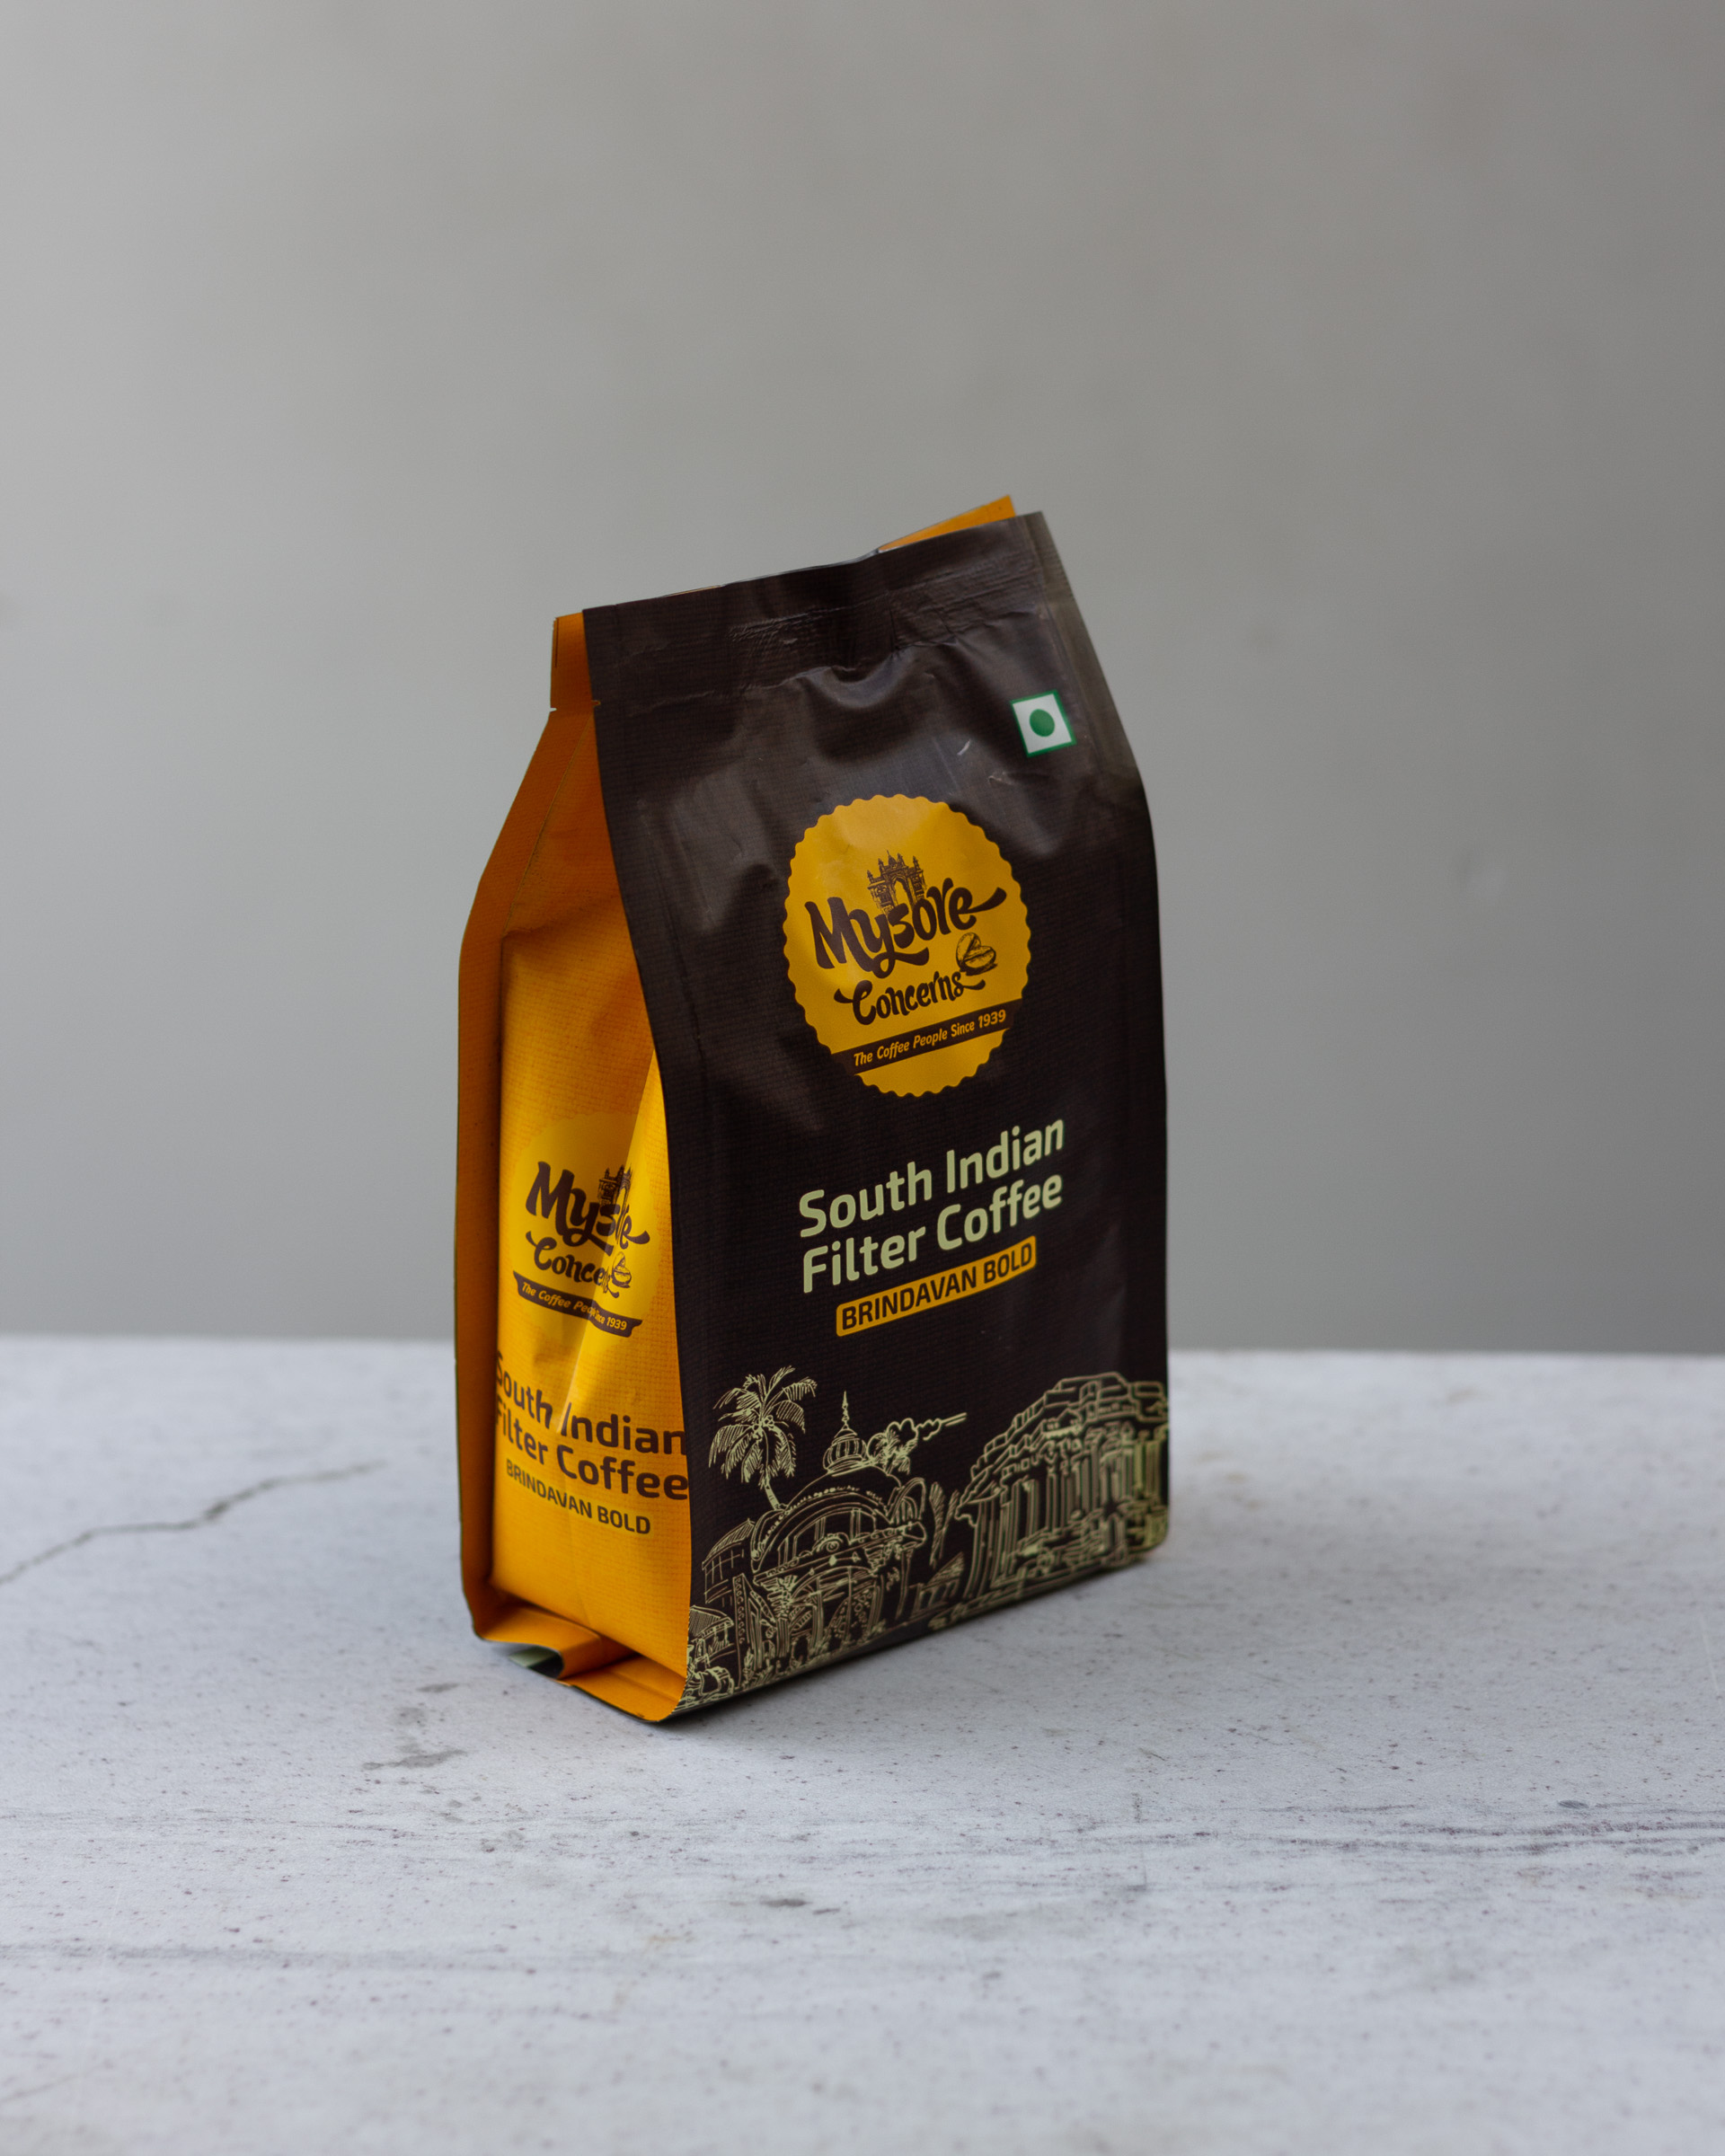 Crown South Indian Filter - Mysore Concerns Coffee